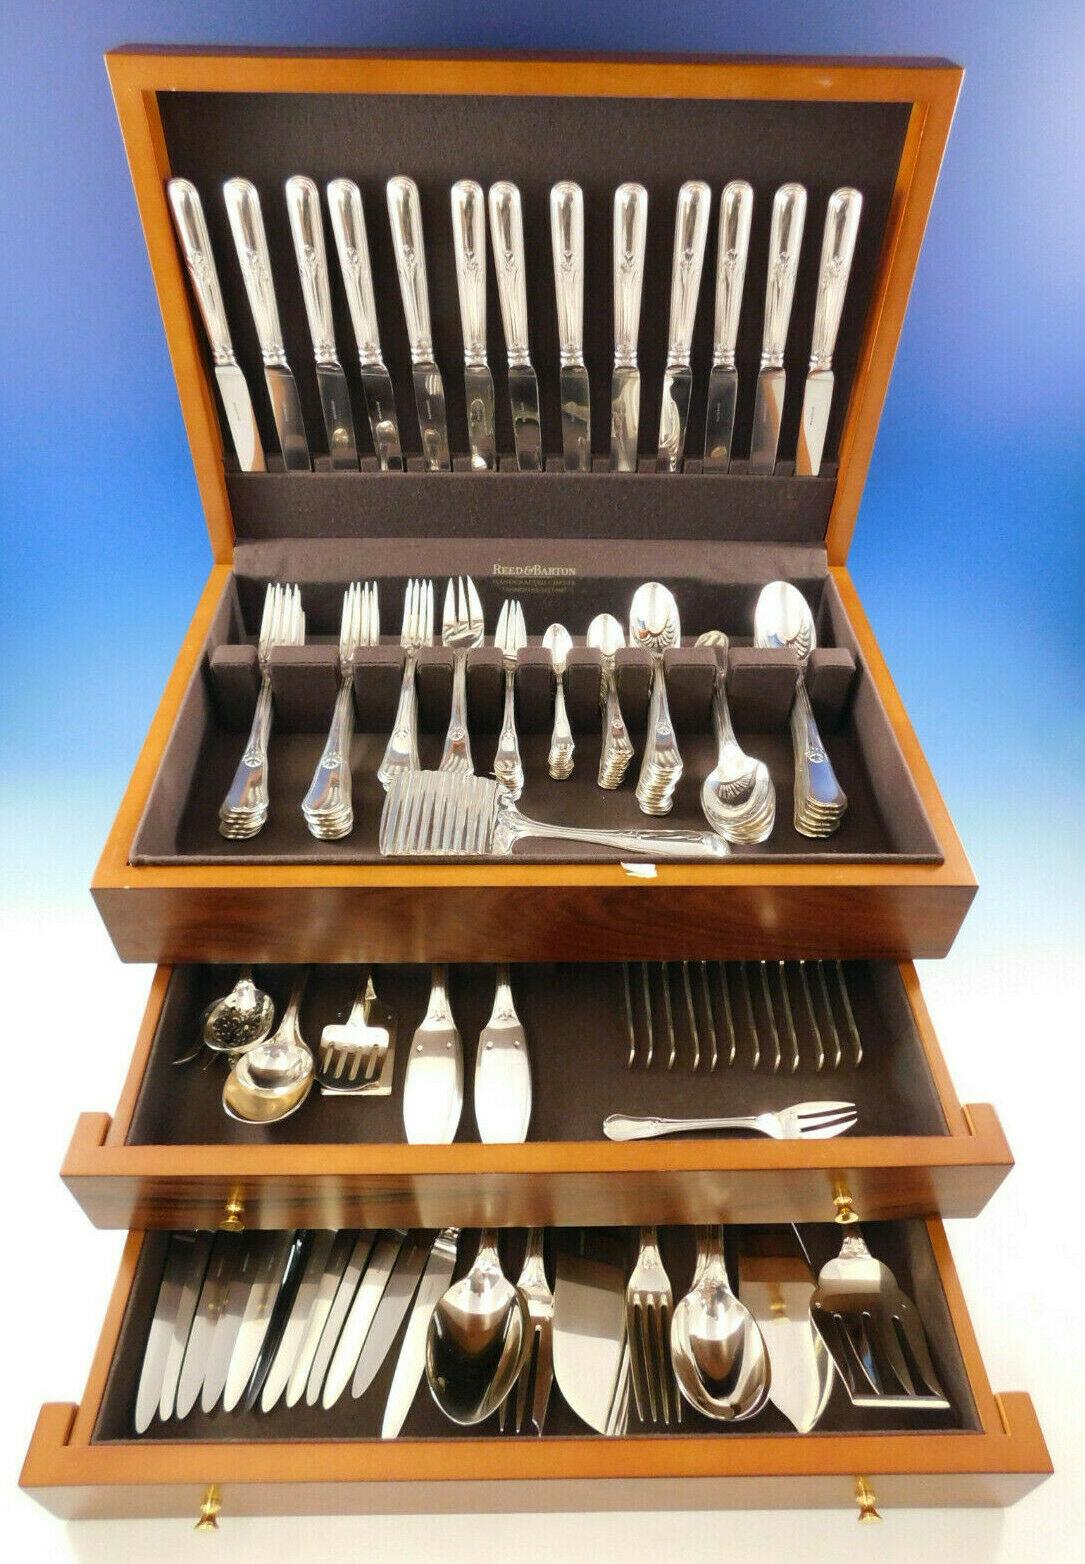 Superb Rochambeau by Puiforcat France 950 silver flatware set with delicate thread and leaf detailing, 159 pieces. This incredible set includes:

12 dinner size knives, w/pointed stainless blades, 9 3/4